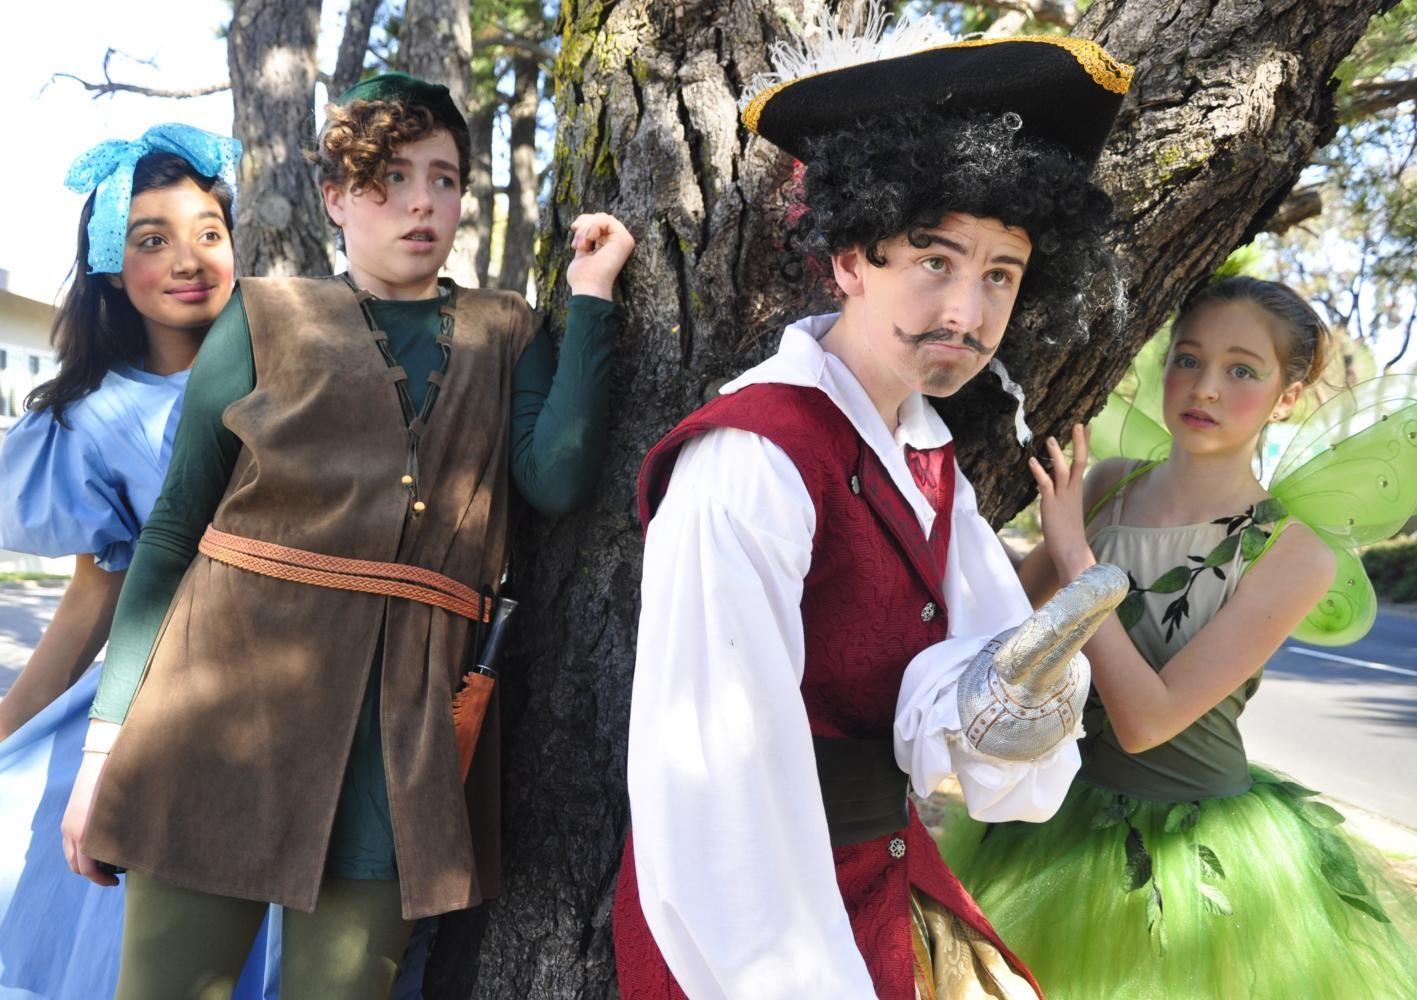 From April 28 through April 30, Ralston Middle School performed the musical “Peter Pan Jr.